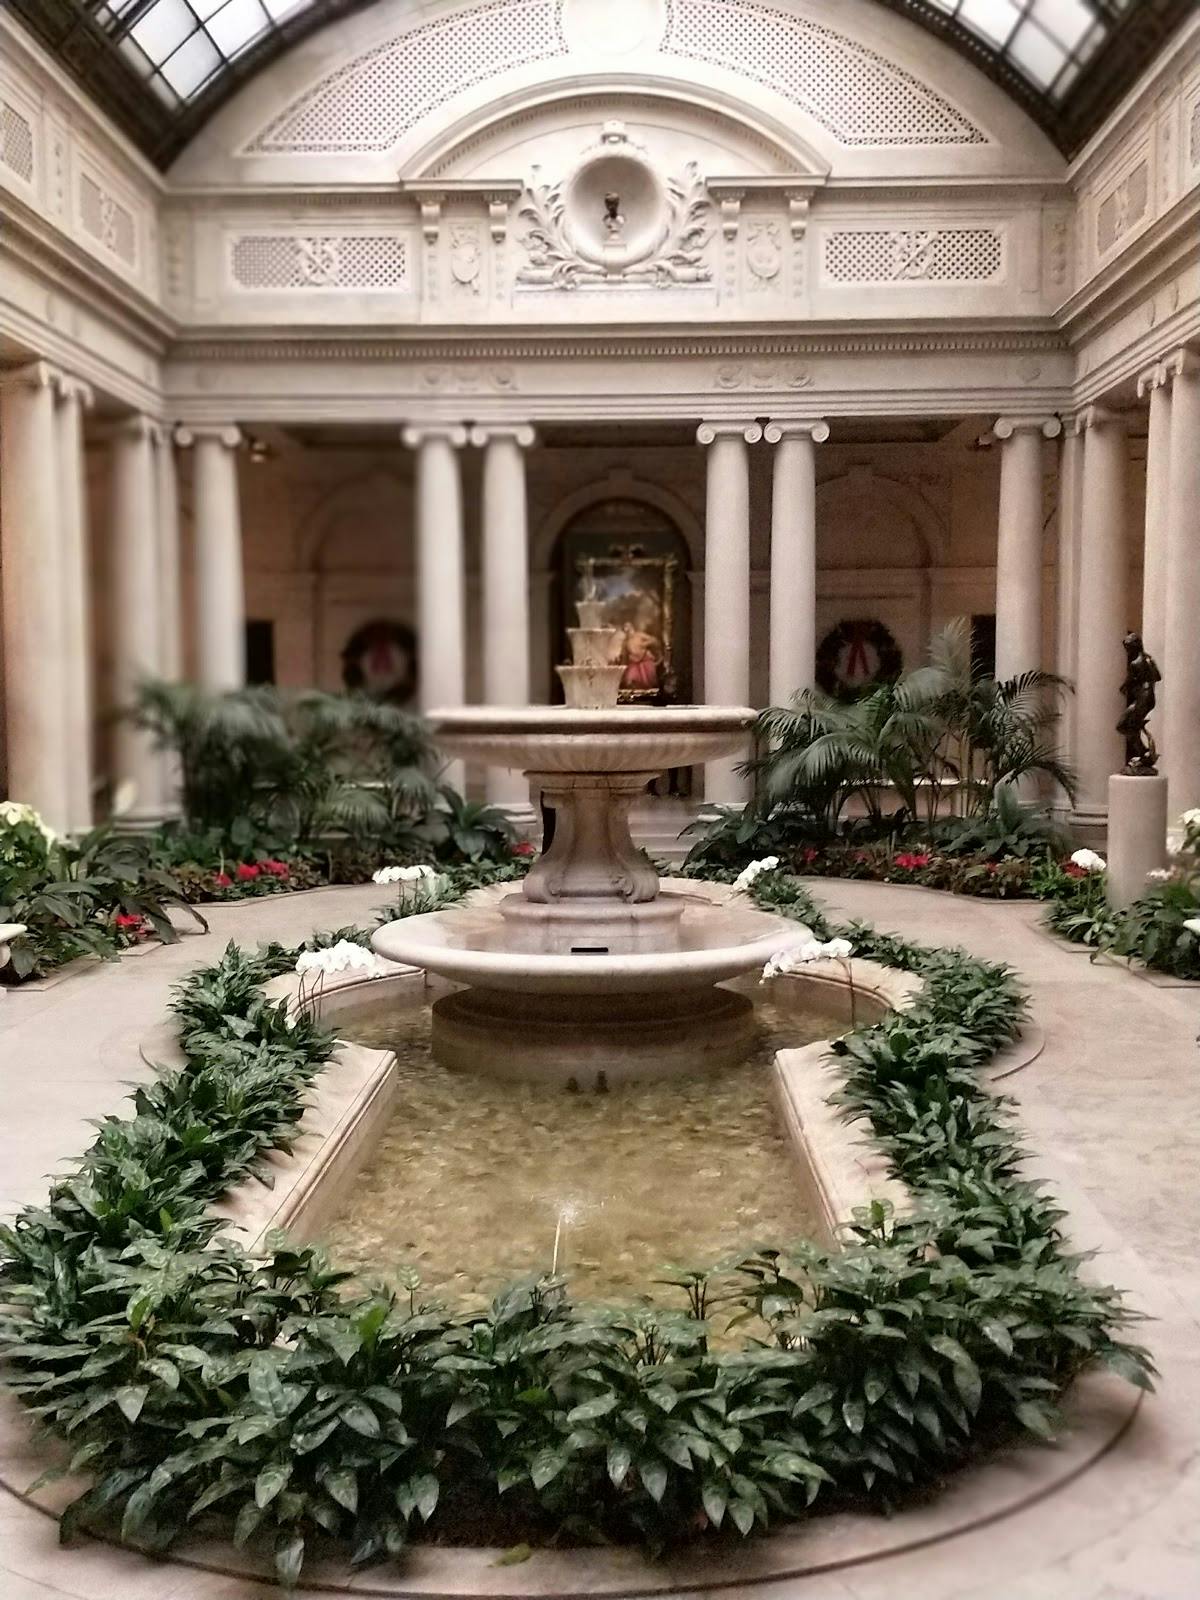 Image - The Frick Collection